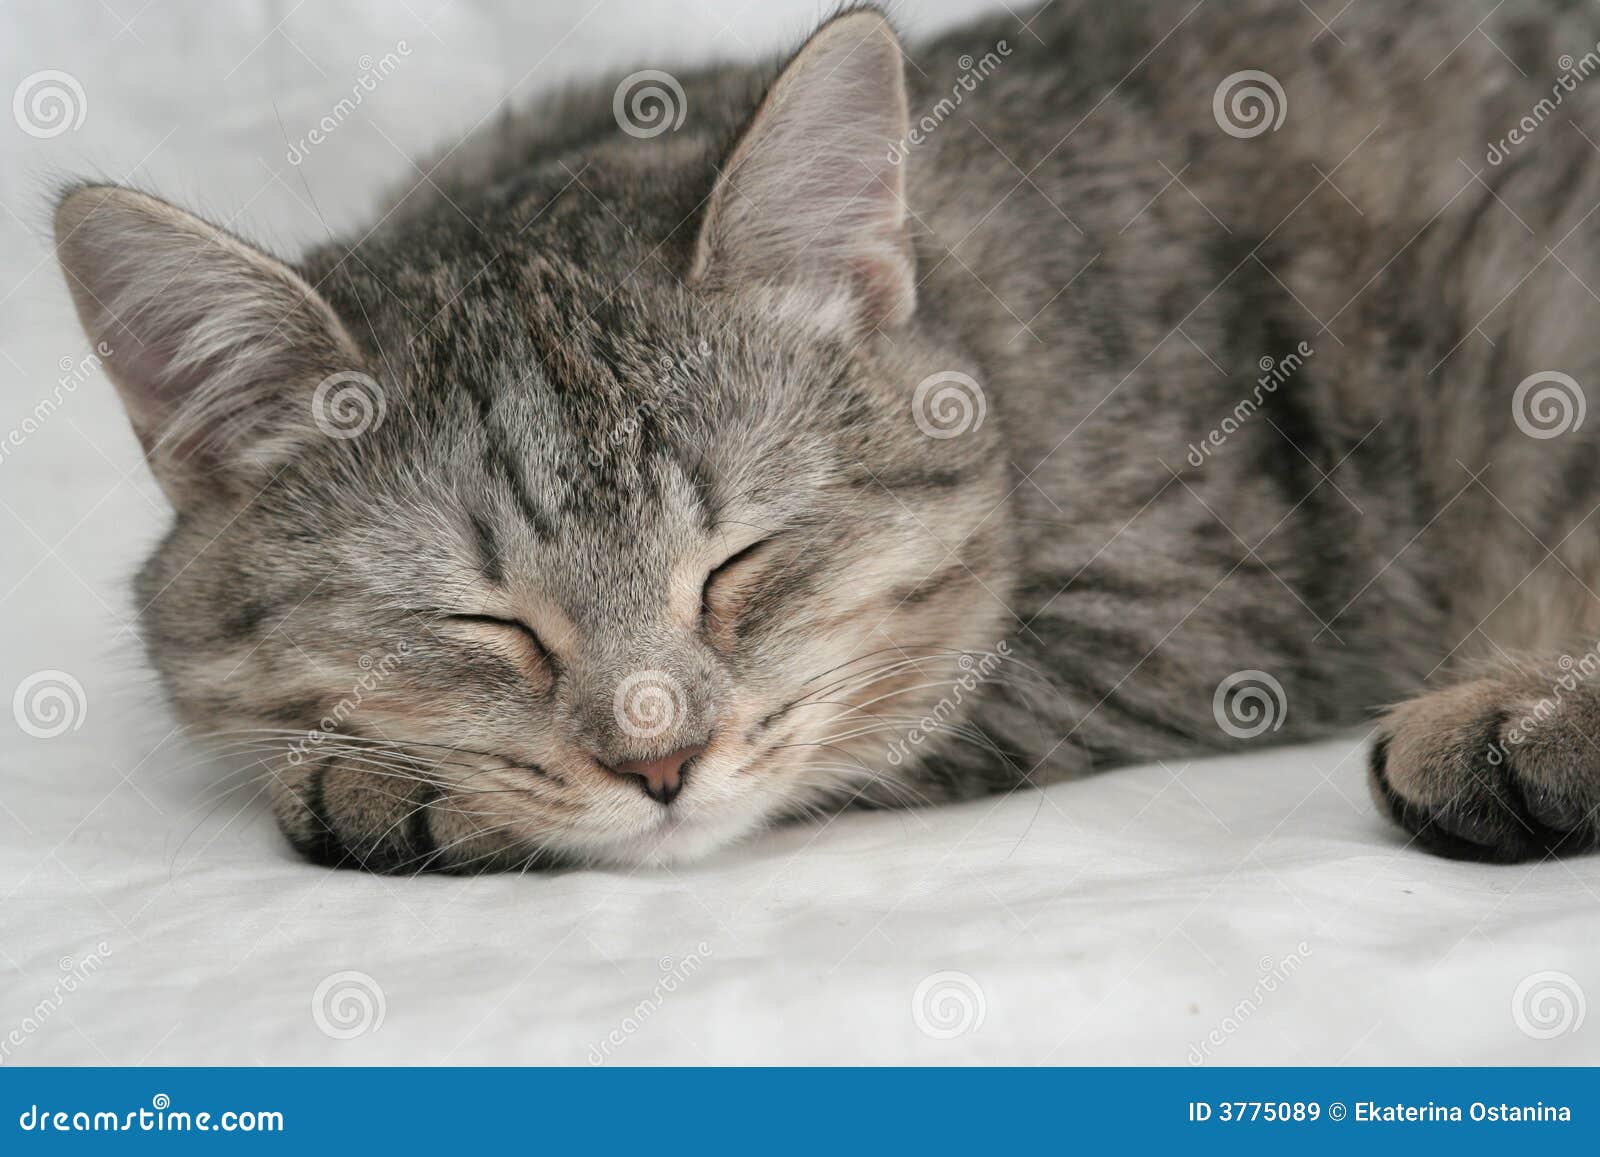 the grey cat which sleeps